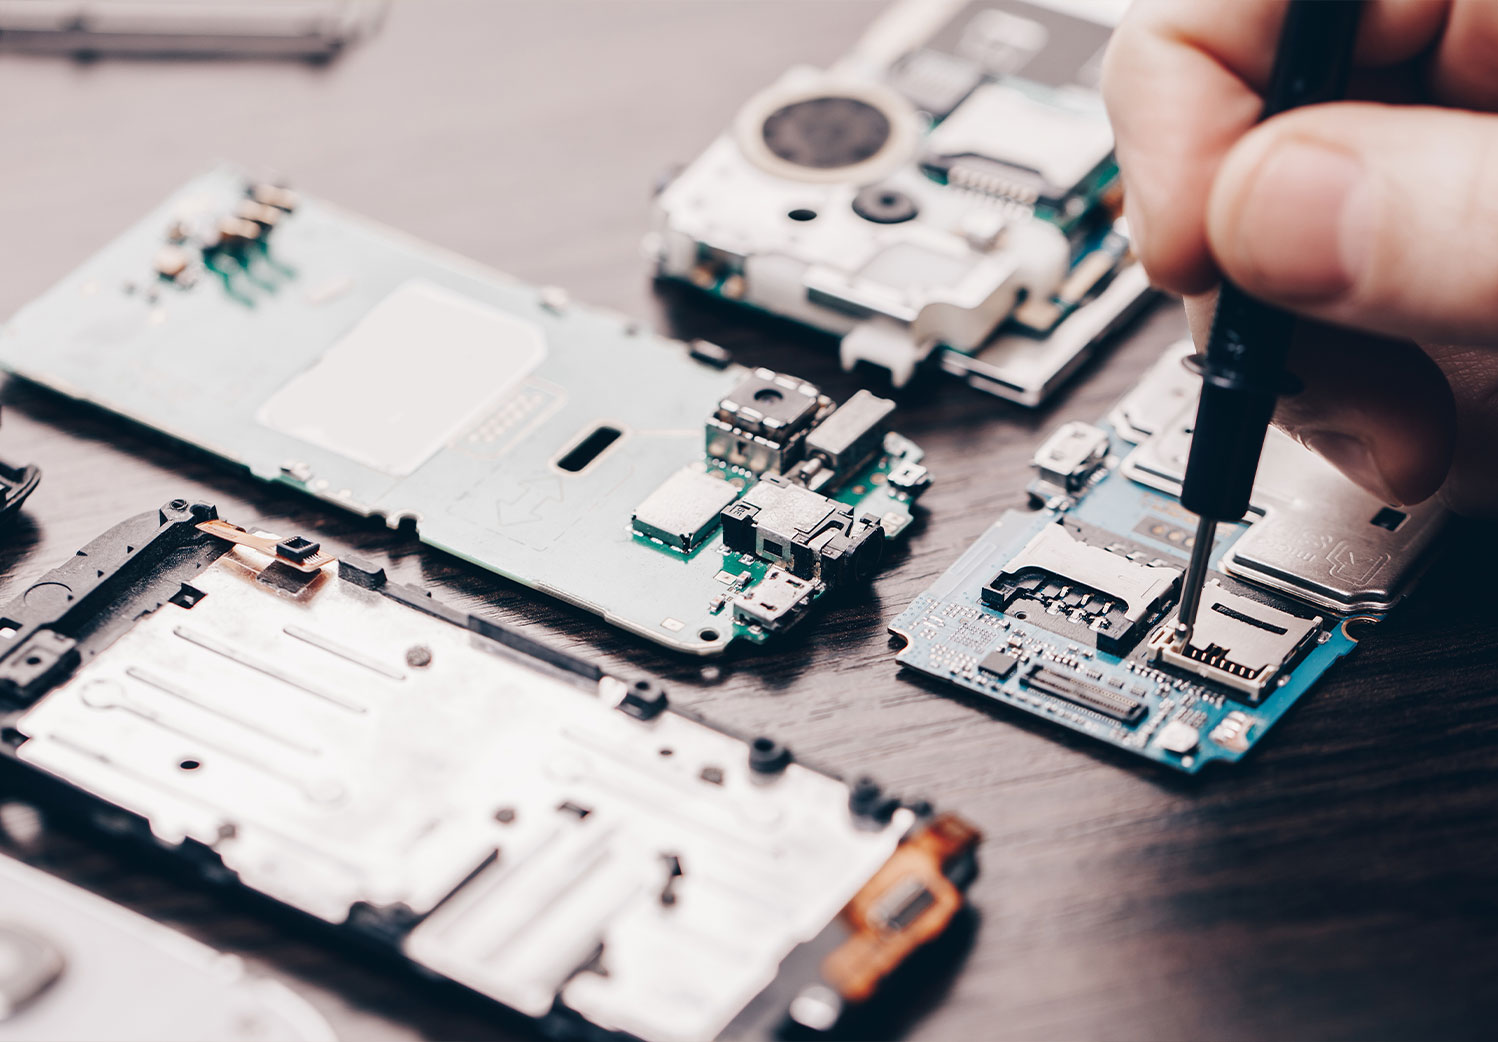 The EUs strengthened right to repair- what does it mean for UK businesses? 